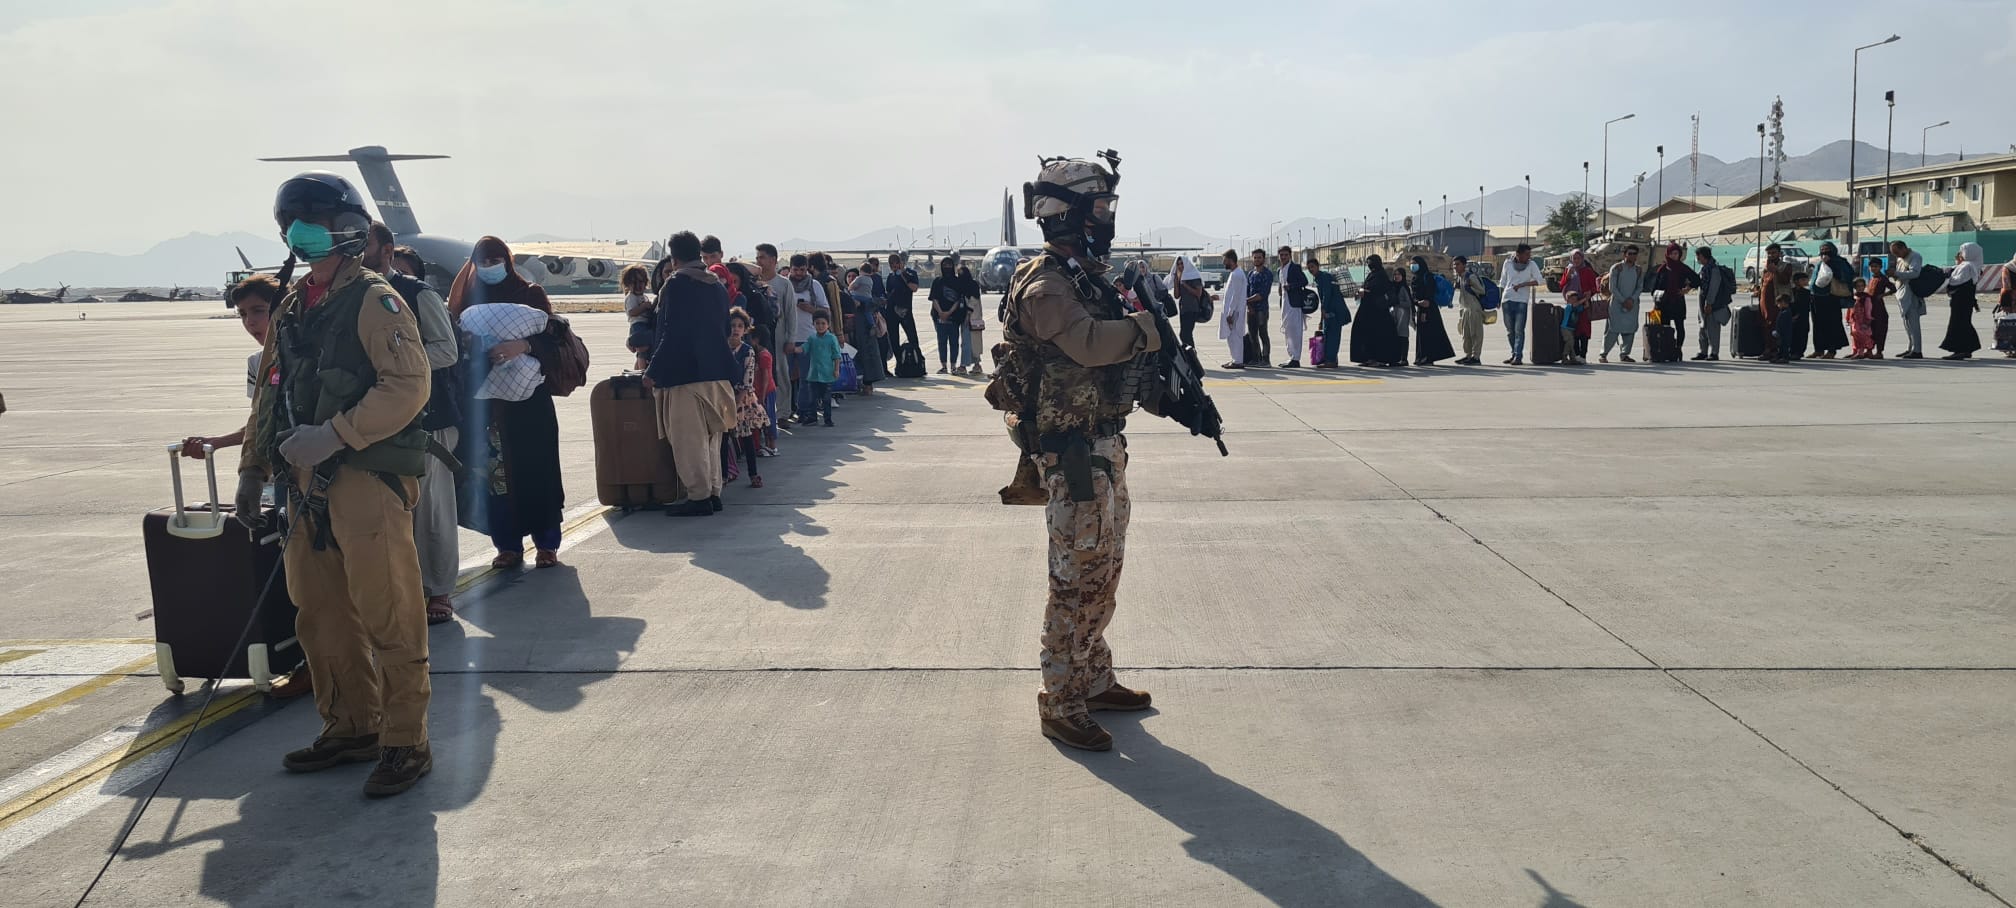 KABUL: This handout picture released and taken by the Italian Defense press office yesterday shows soldiers on the tarmac past passengers, who fled Afghanistan, waiting to board on an Italian military aircraft at Kabul airport, to fly to Rome Fiumicino. – AFPn